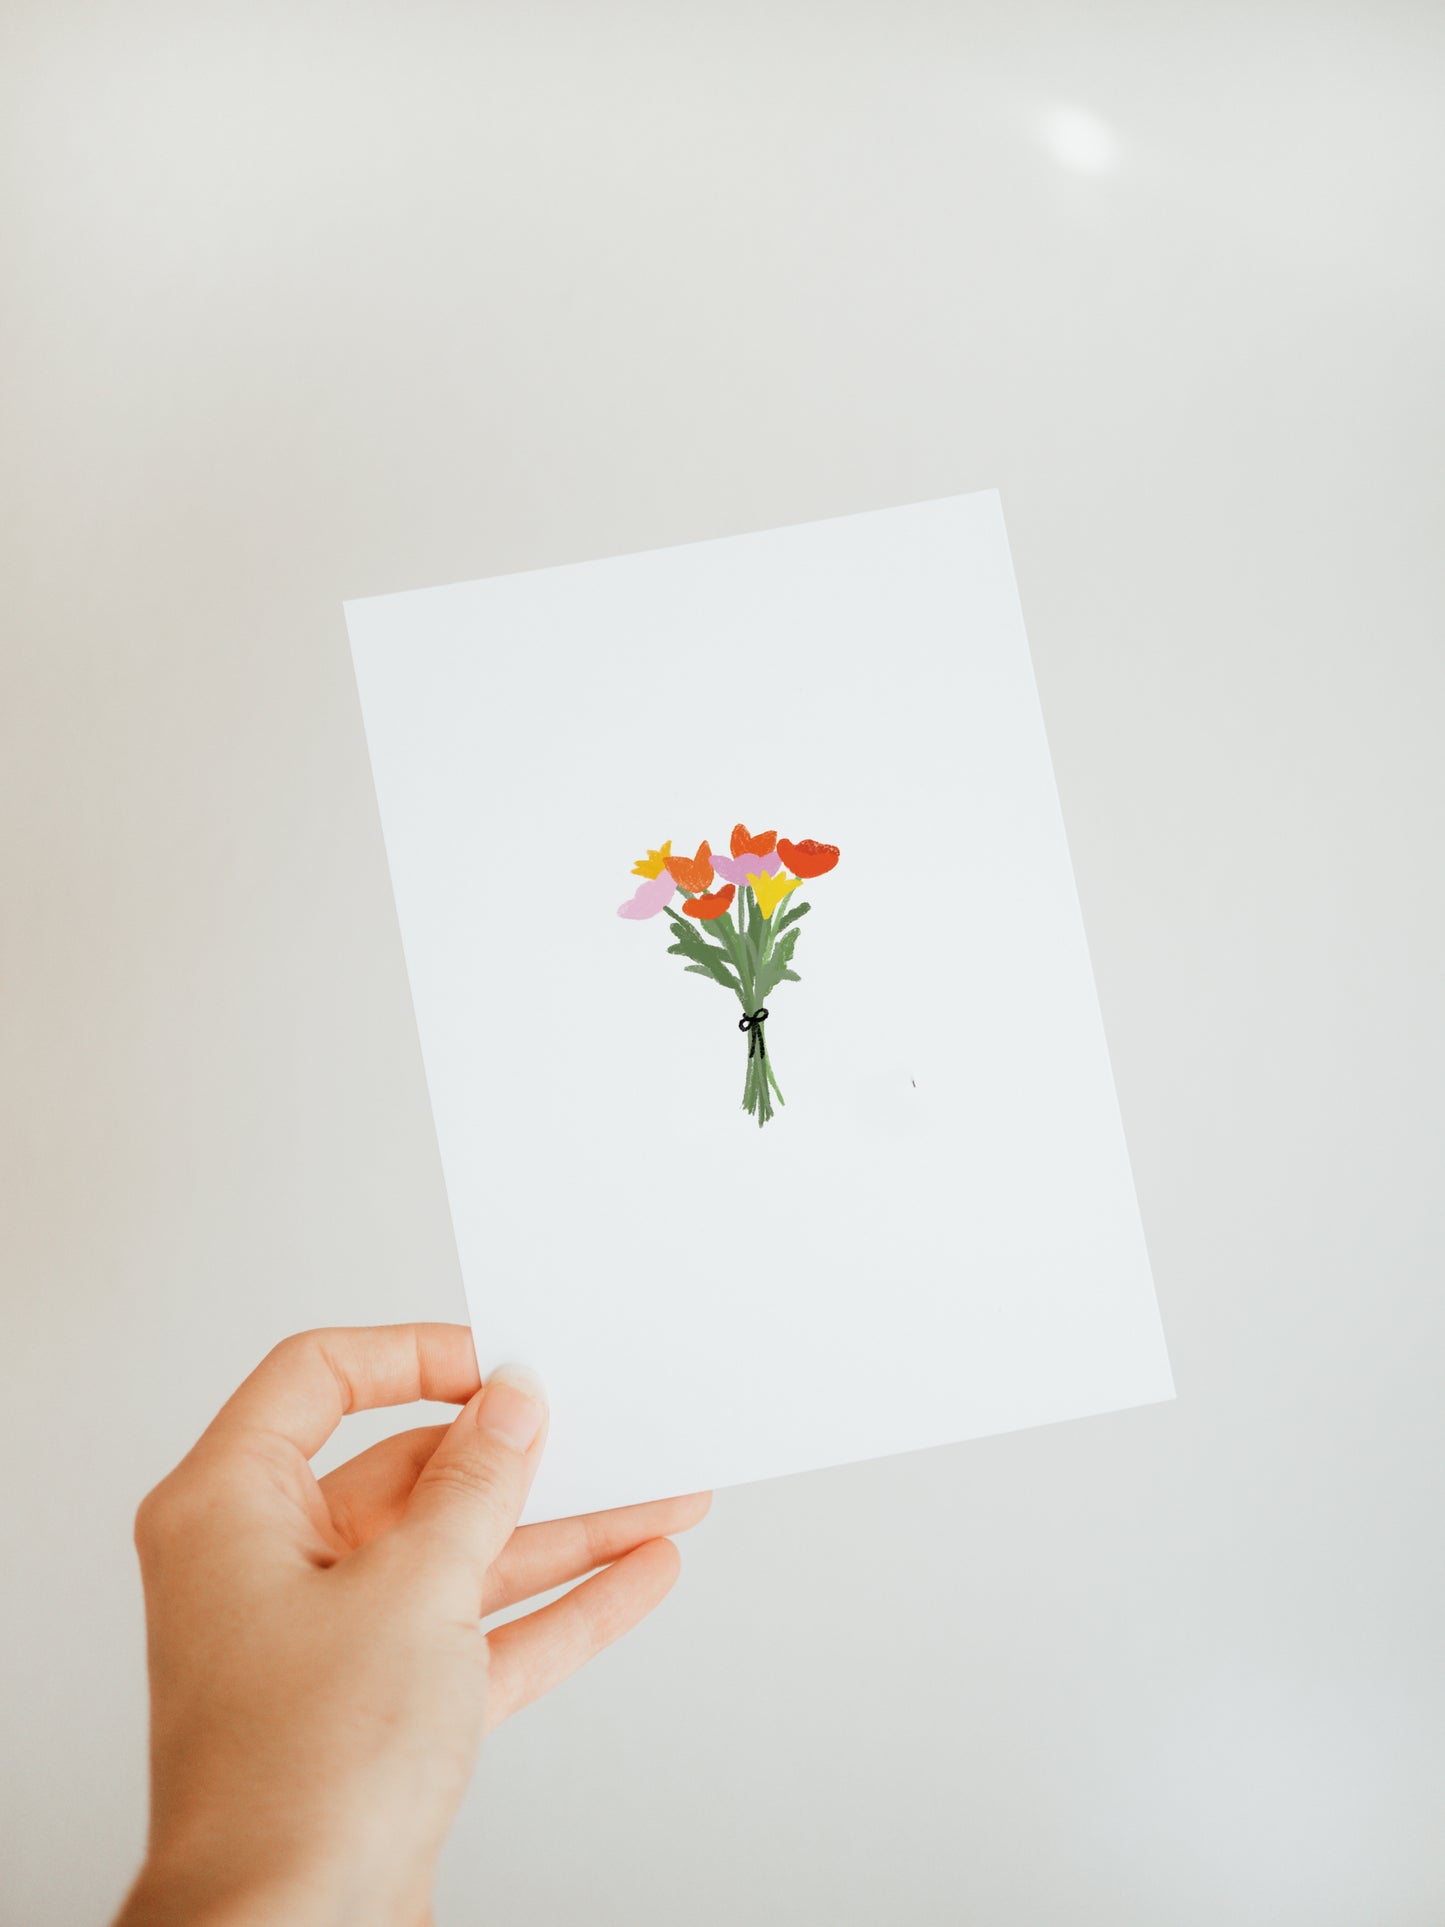 hand holding a white greeting card with a small and simple bouquet of yellow, pink, and red flowers with green stems tied with a black ribbon.